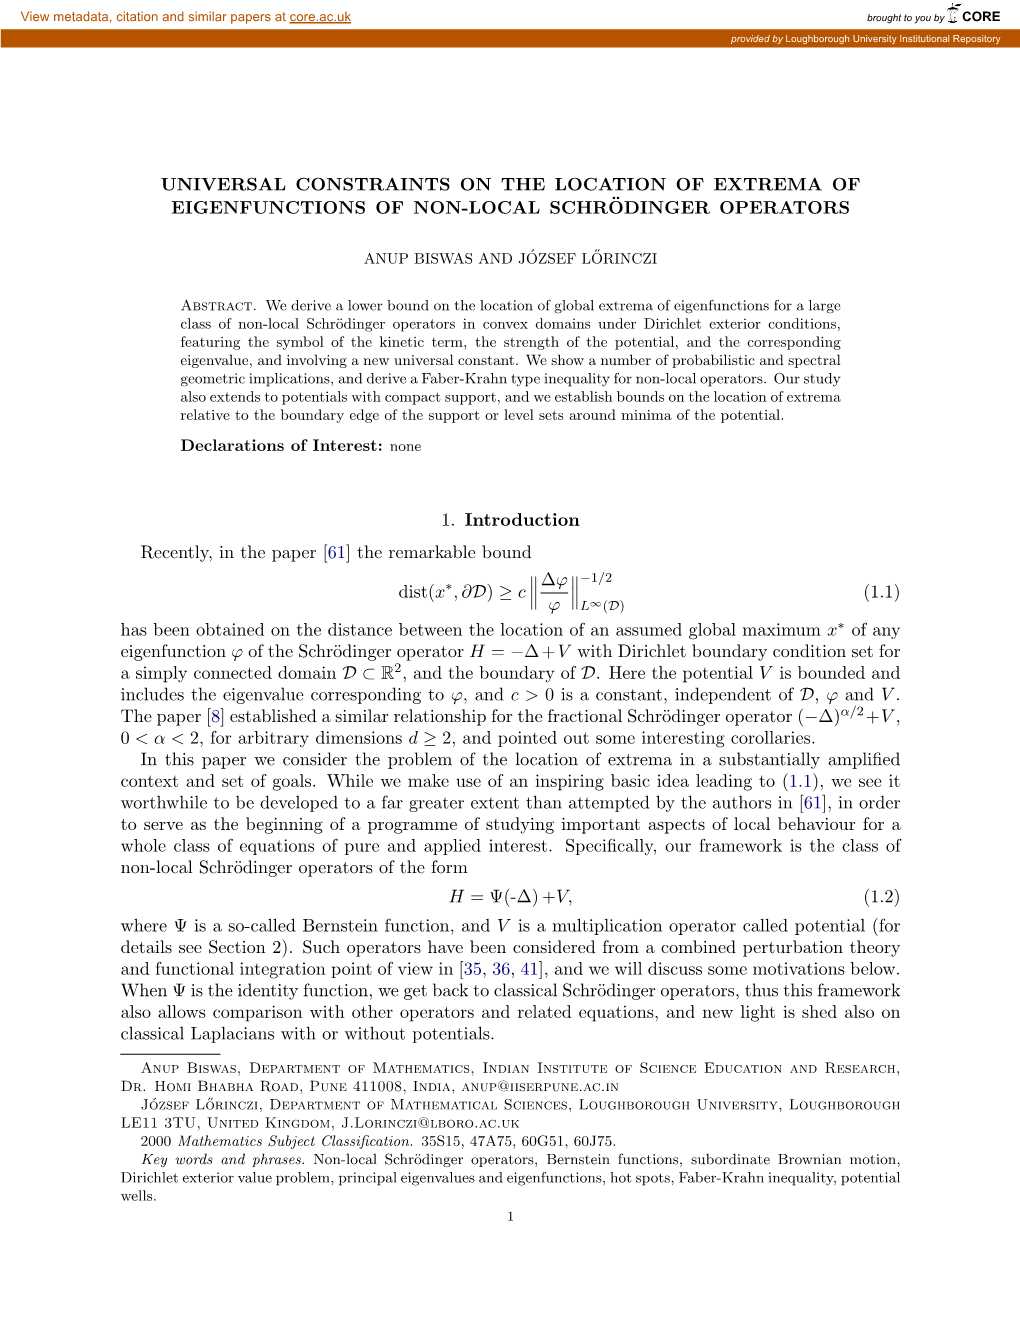 Universal Constraints on the Location of Extrema of Eigenfunctions of Non-Local Schrodinger¨ Operators